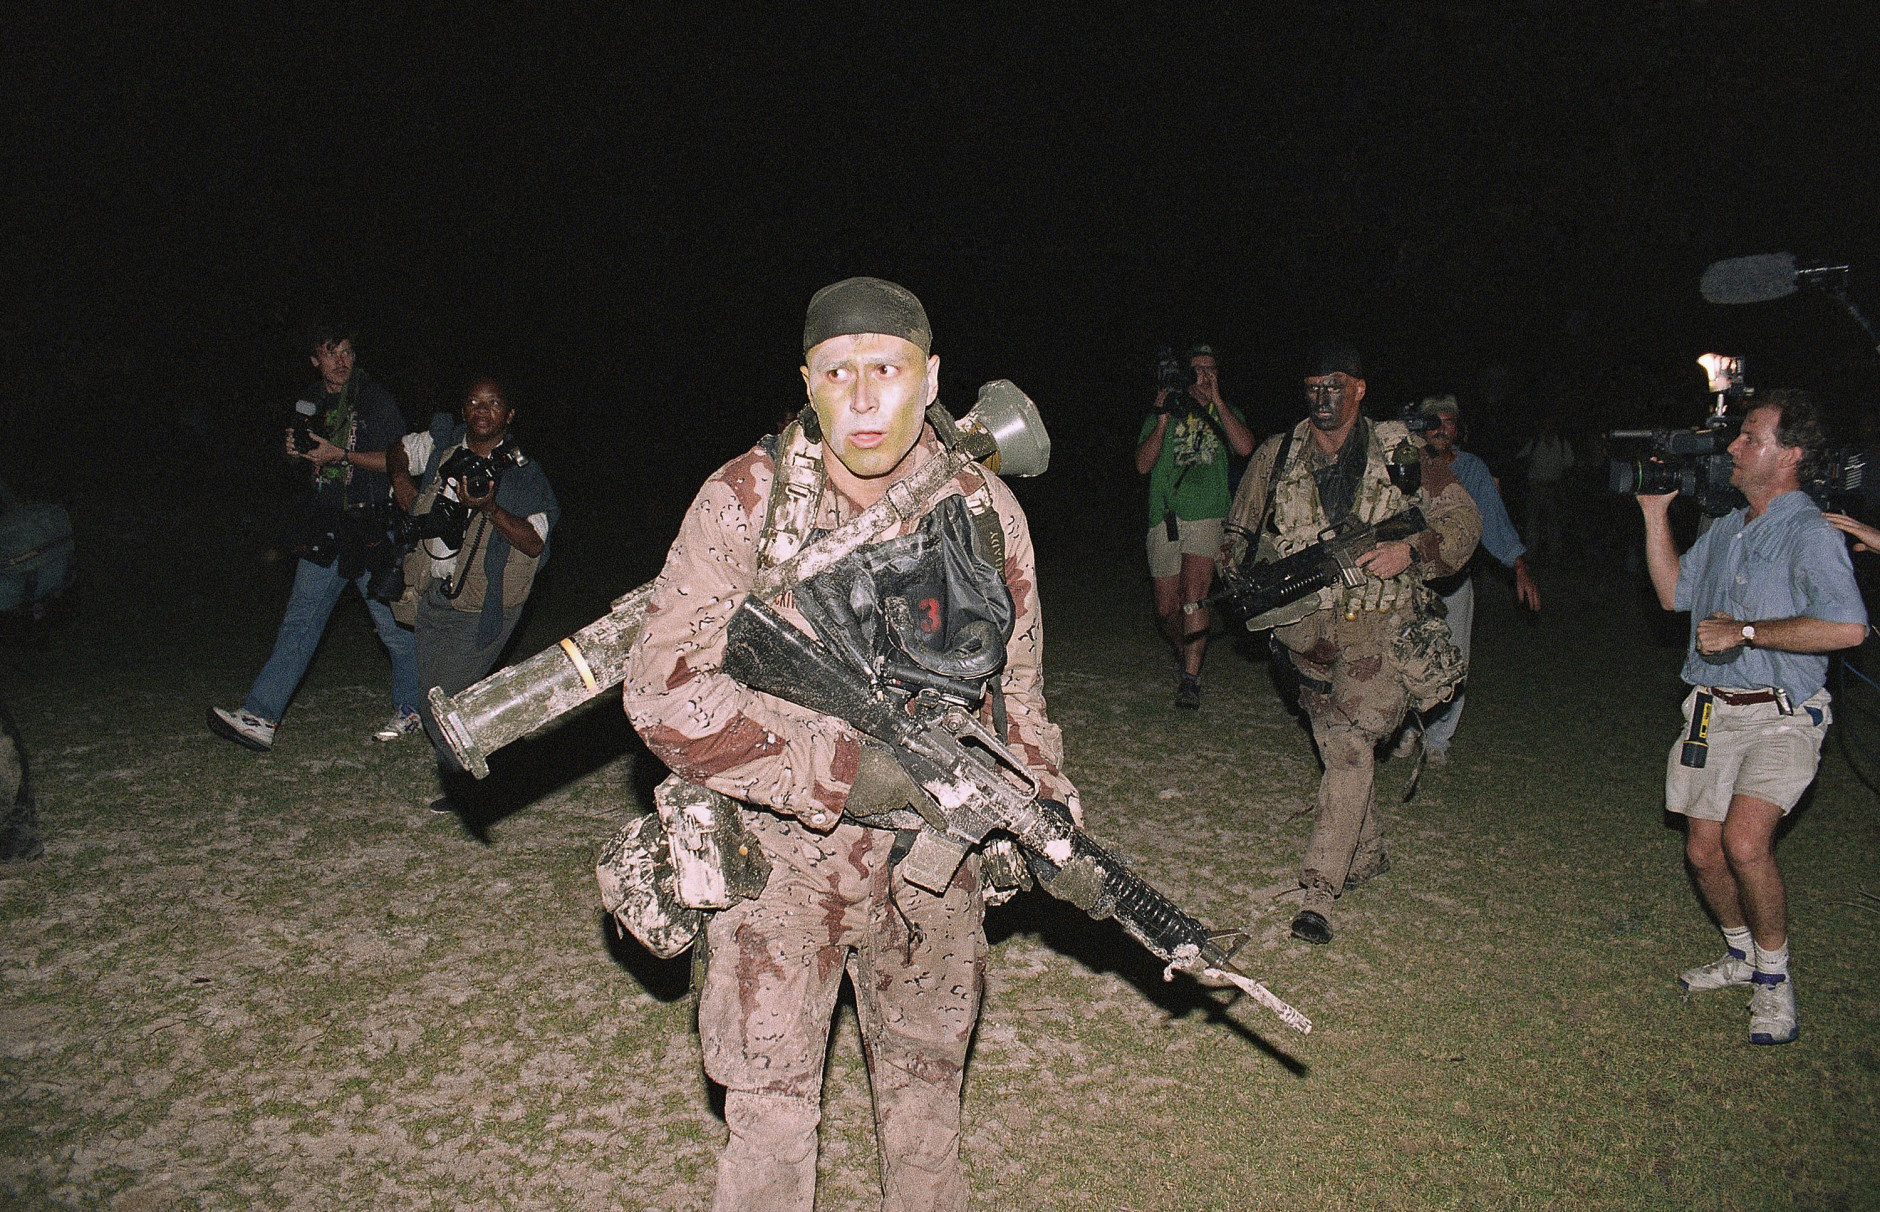 U.S. Marines are pictured running onto the beach while being pursued by photographers and other media during the beginning of Operation Restore Hope, Dec. 9, 1992 in Somalia. (AP Photo/Denis Paquin)